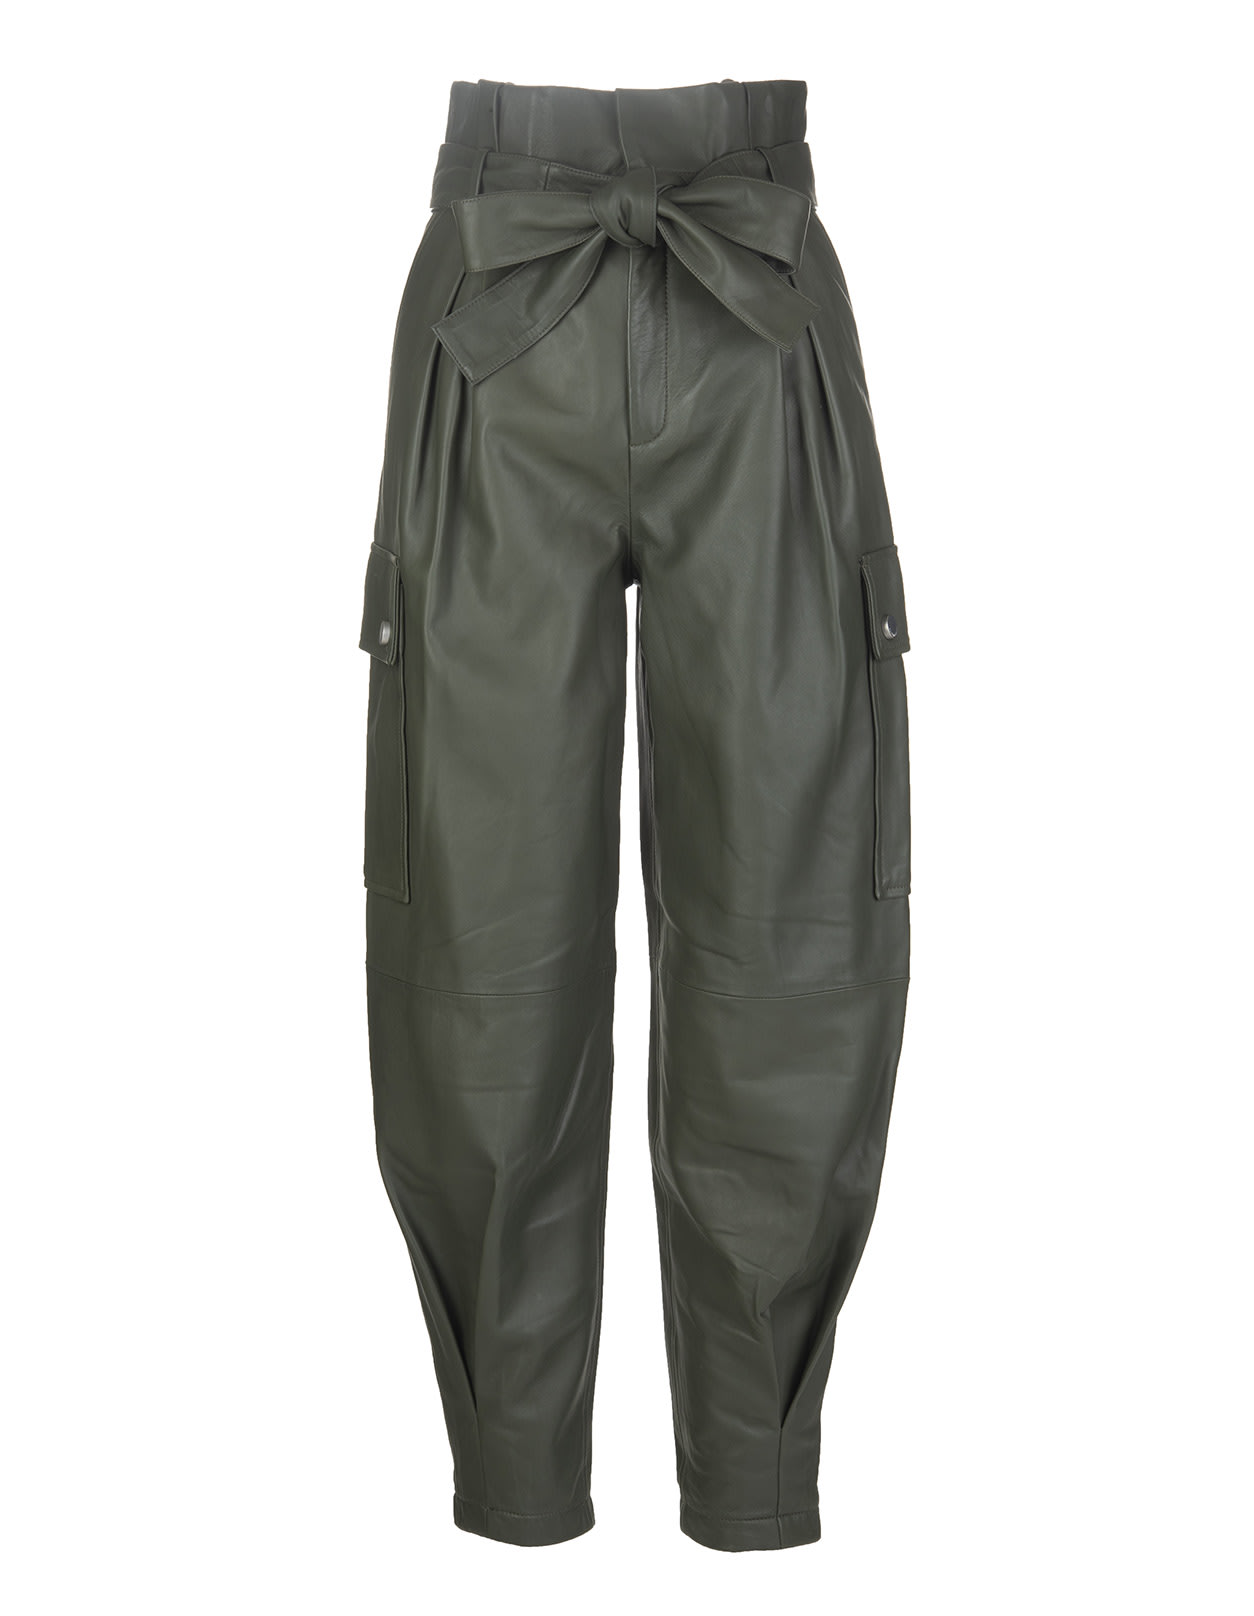 RED VALENTINO MILITARY GREEN LEATHER TROUSERS WITH BELT,VR3NF00K5BW 365